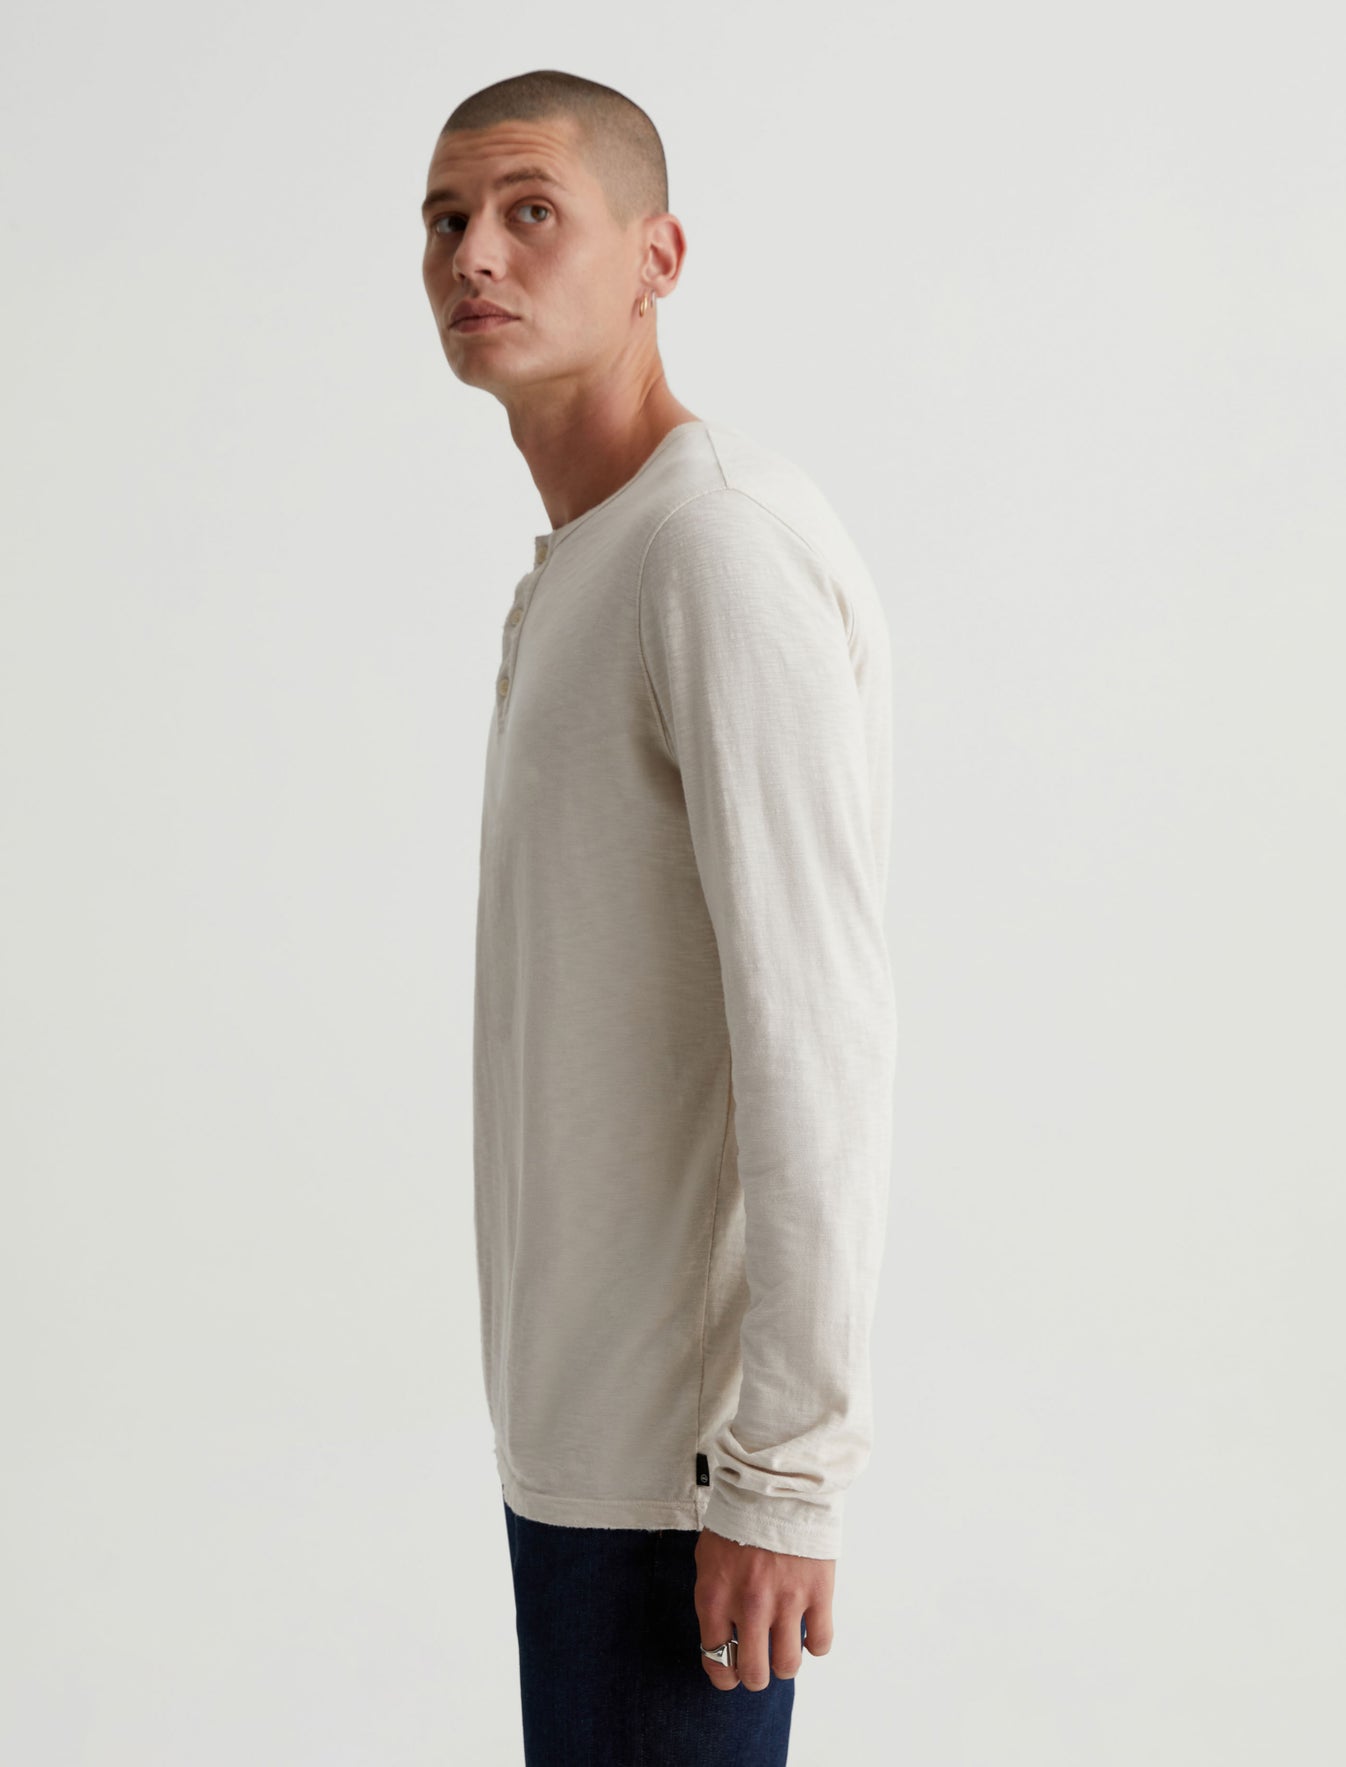 LS White Henley - T-Shirts made in USA from Portuguese fabric